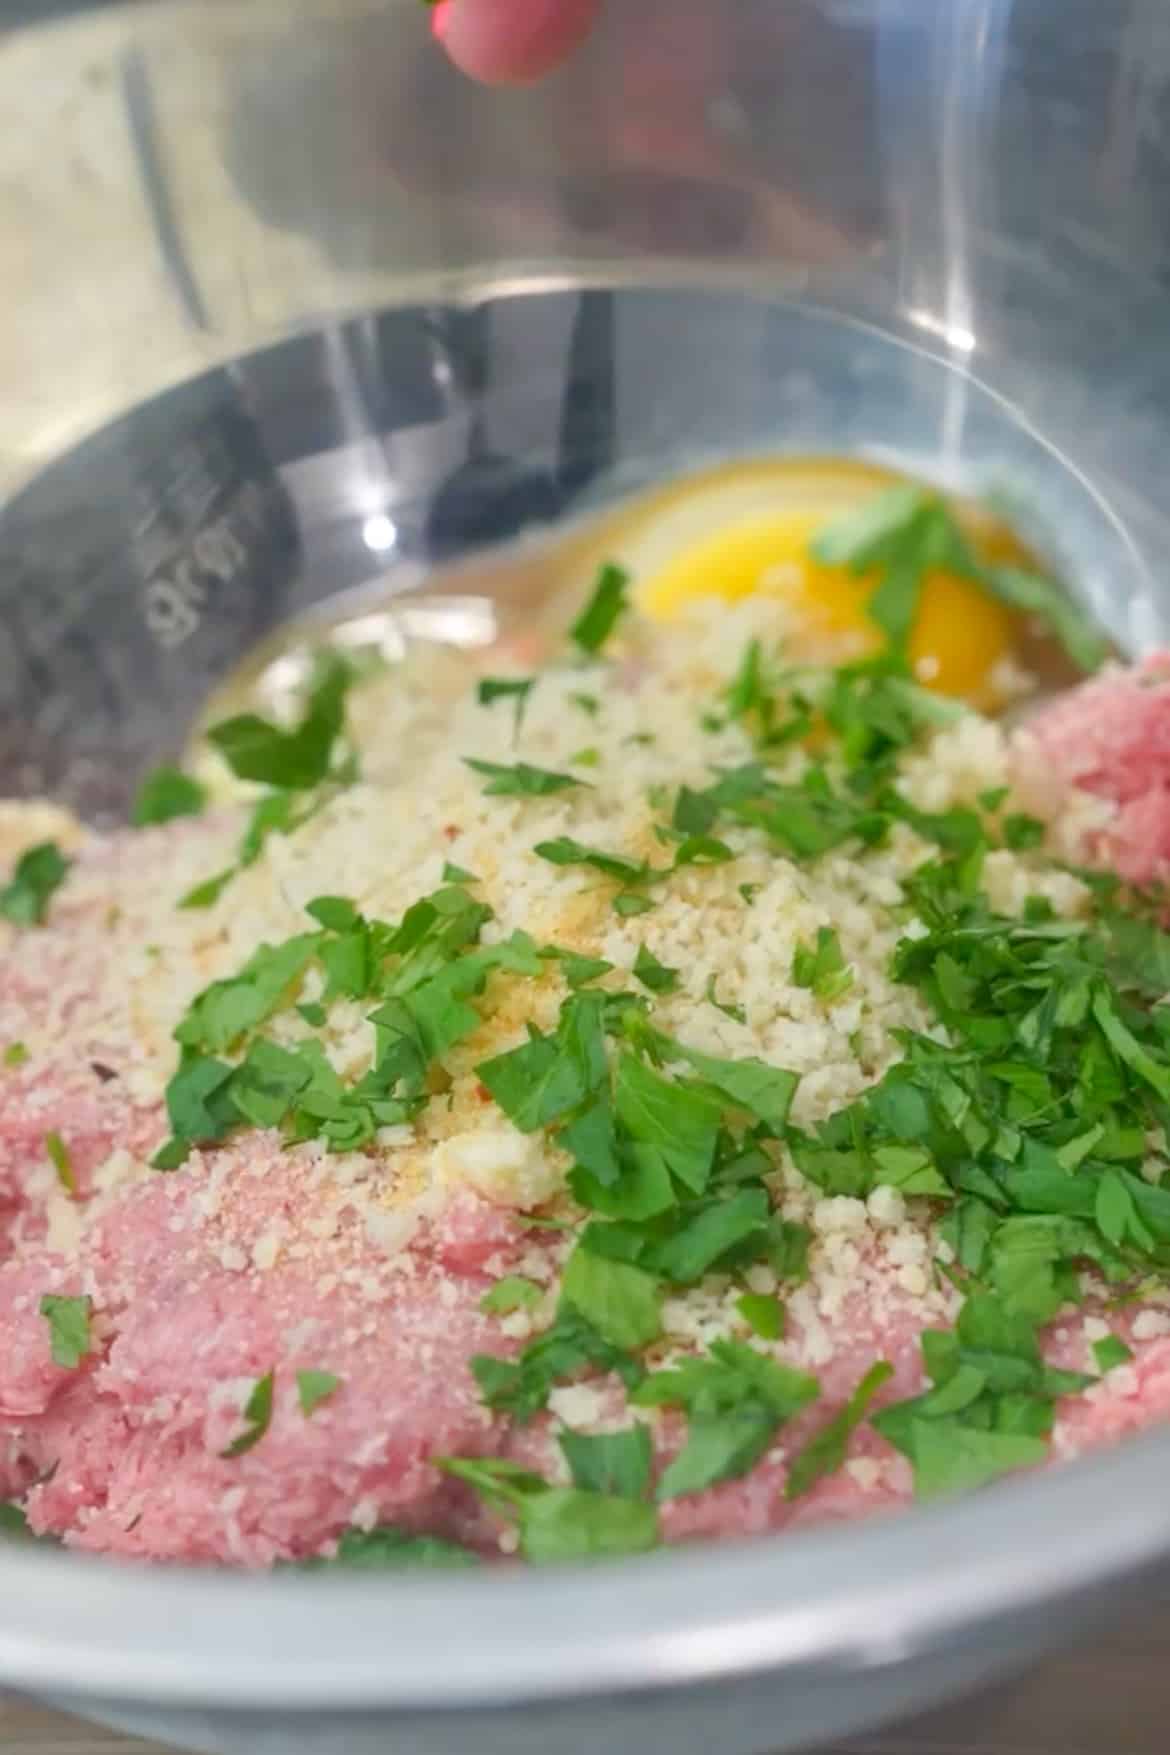 Prepare the Meatballs: In a large mixing bowl, combine the ground beef, grated Parmesan cheese, finely chopped parsley, garlic powder, panko breadcrumbs, and egg. Season the mixture with salt and pepper to taste. 